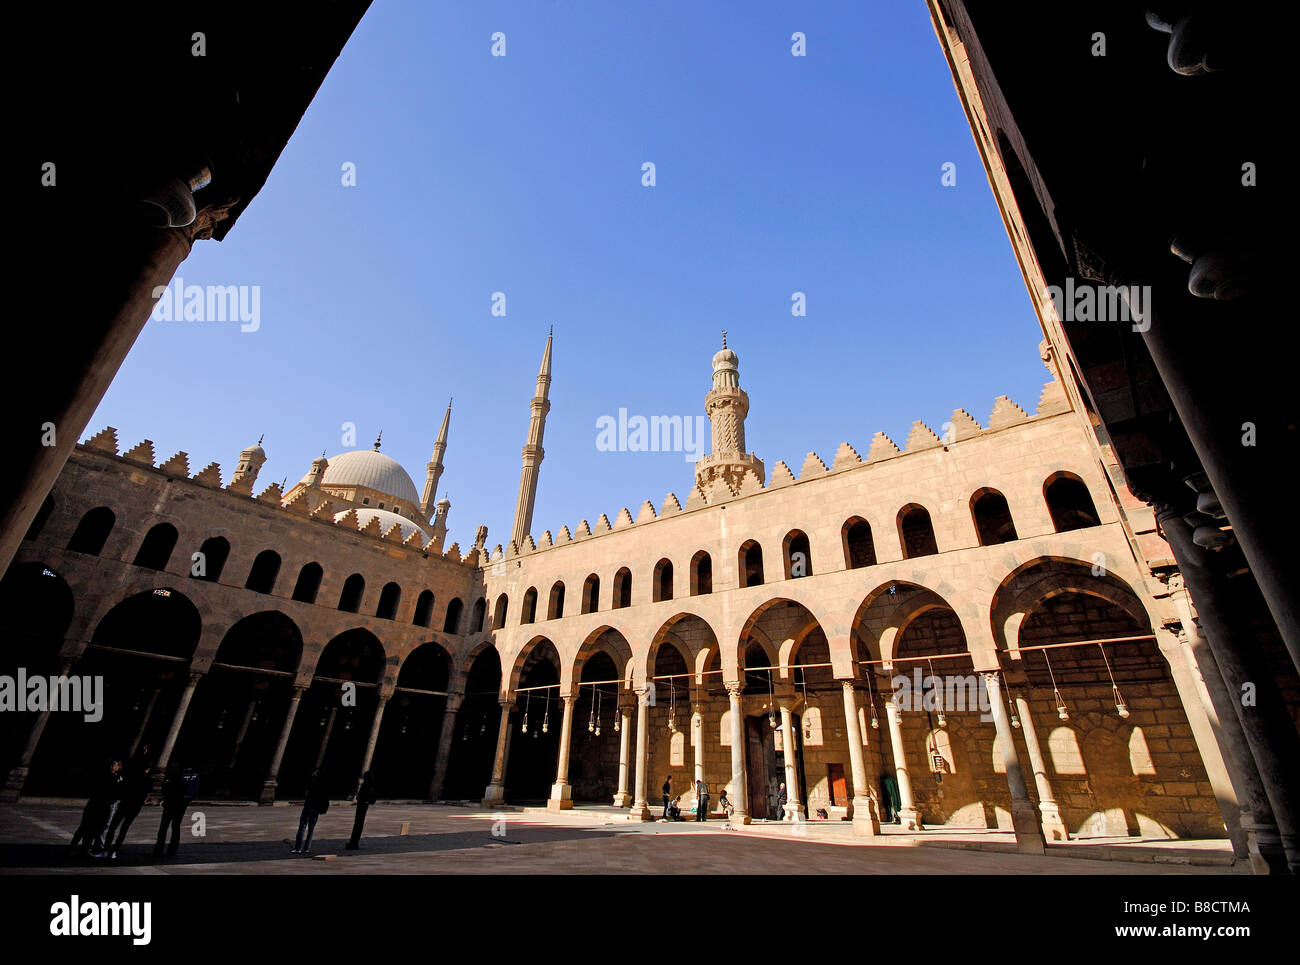 CAIRO, EGYPT. The courtyard of the Mosque of Sultan al-Nasir at the Citadel. Stock Photo